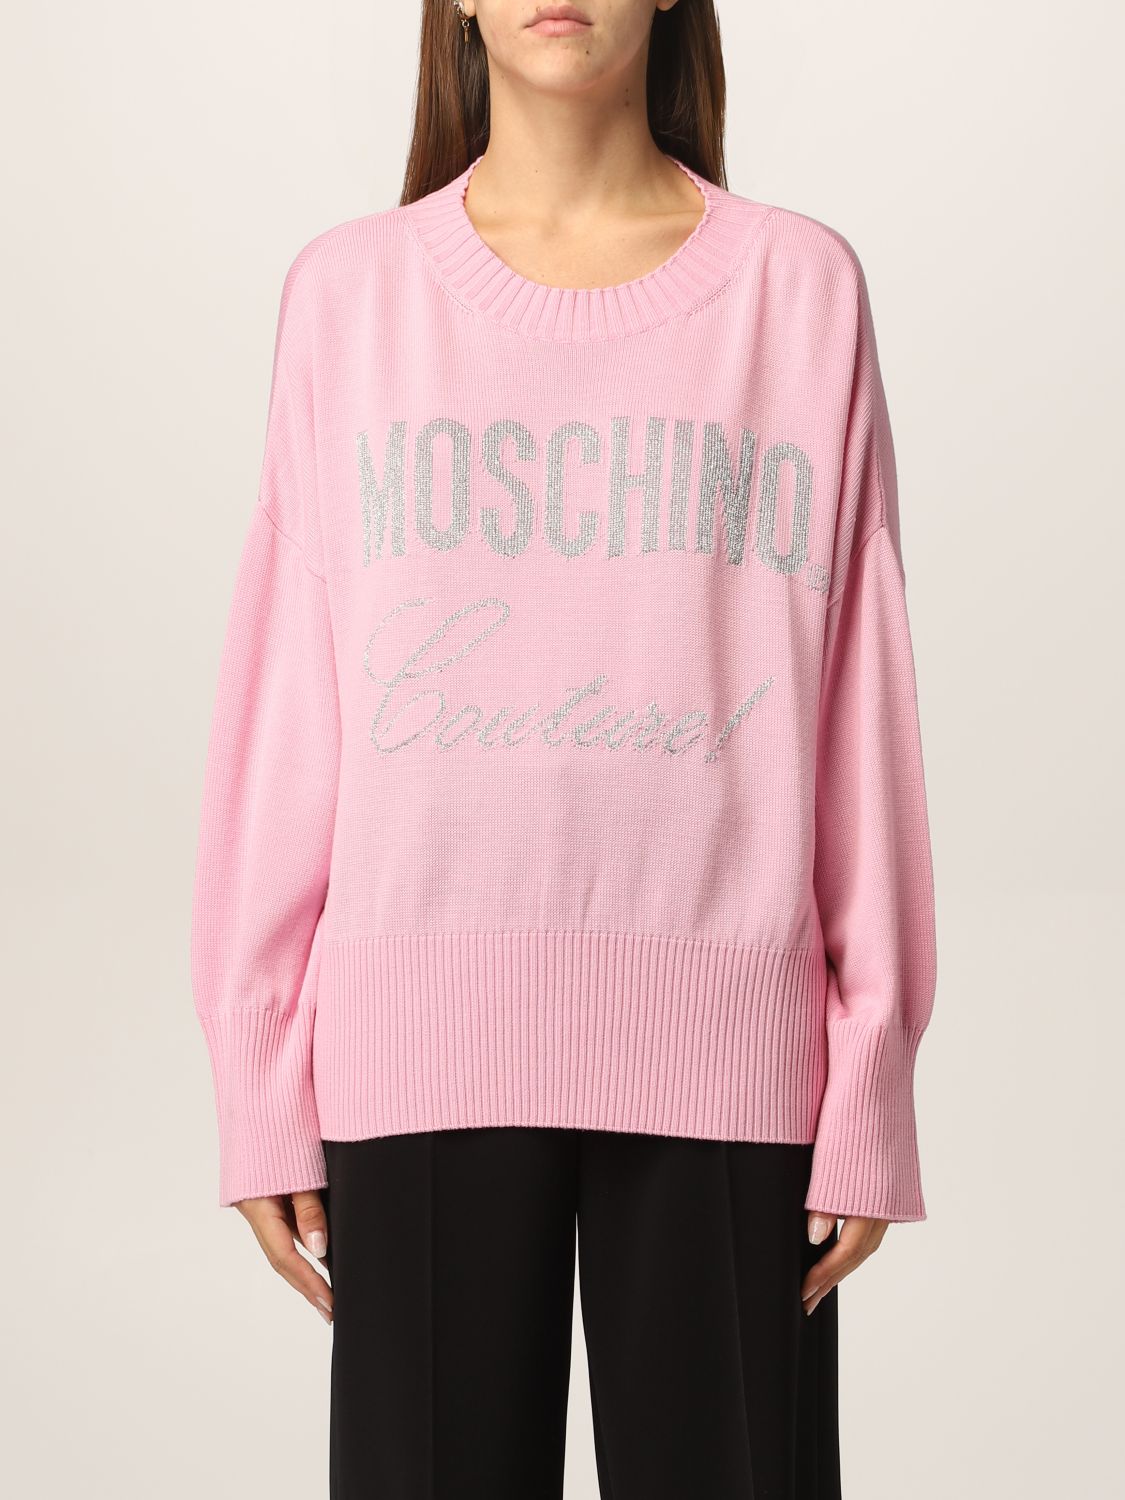 MOSCHINO COUTURE: virgin wool sweater - Pink | Sweater Moschino Couture ...